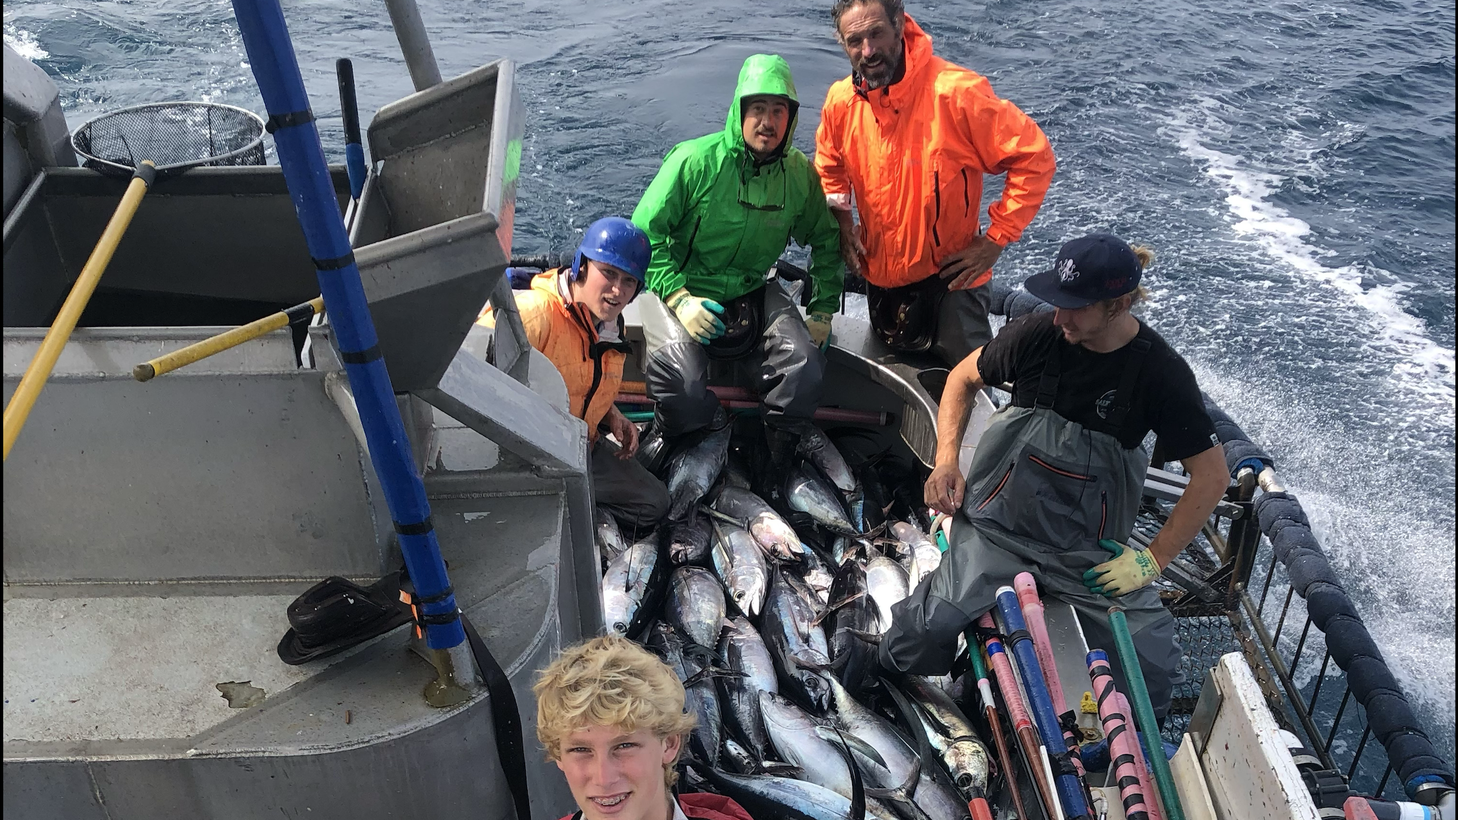 Scott Hawkins photographs his crew, including his sons Wyatt (left, blue helmet) and Colton (front, red jacket) with dozens of albacore tuna they caught in minutes.